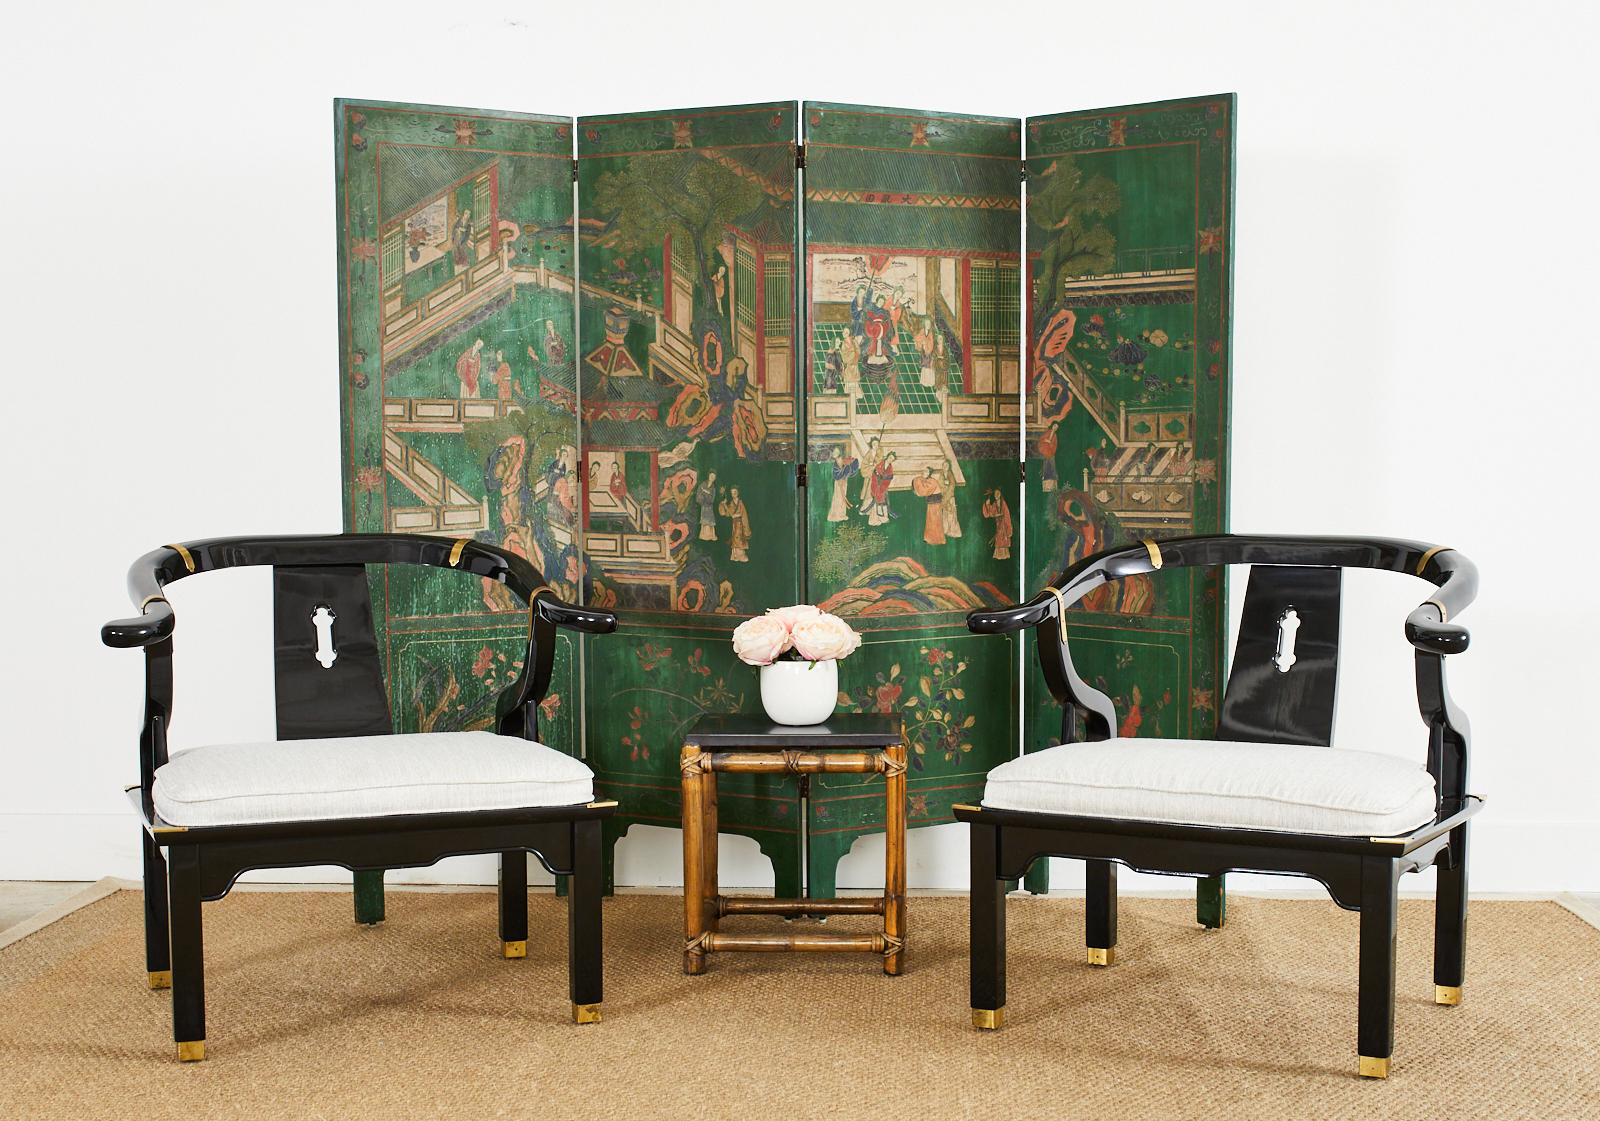 Opulent pair of large Chinese ming style horseshoe lounge chairs made by Century. Originally designed by James Mont these chairs epitomize his over the top dramatic mid-century modern style with an Asian flare. Hardwood frames coated with thick